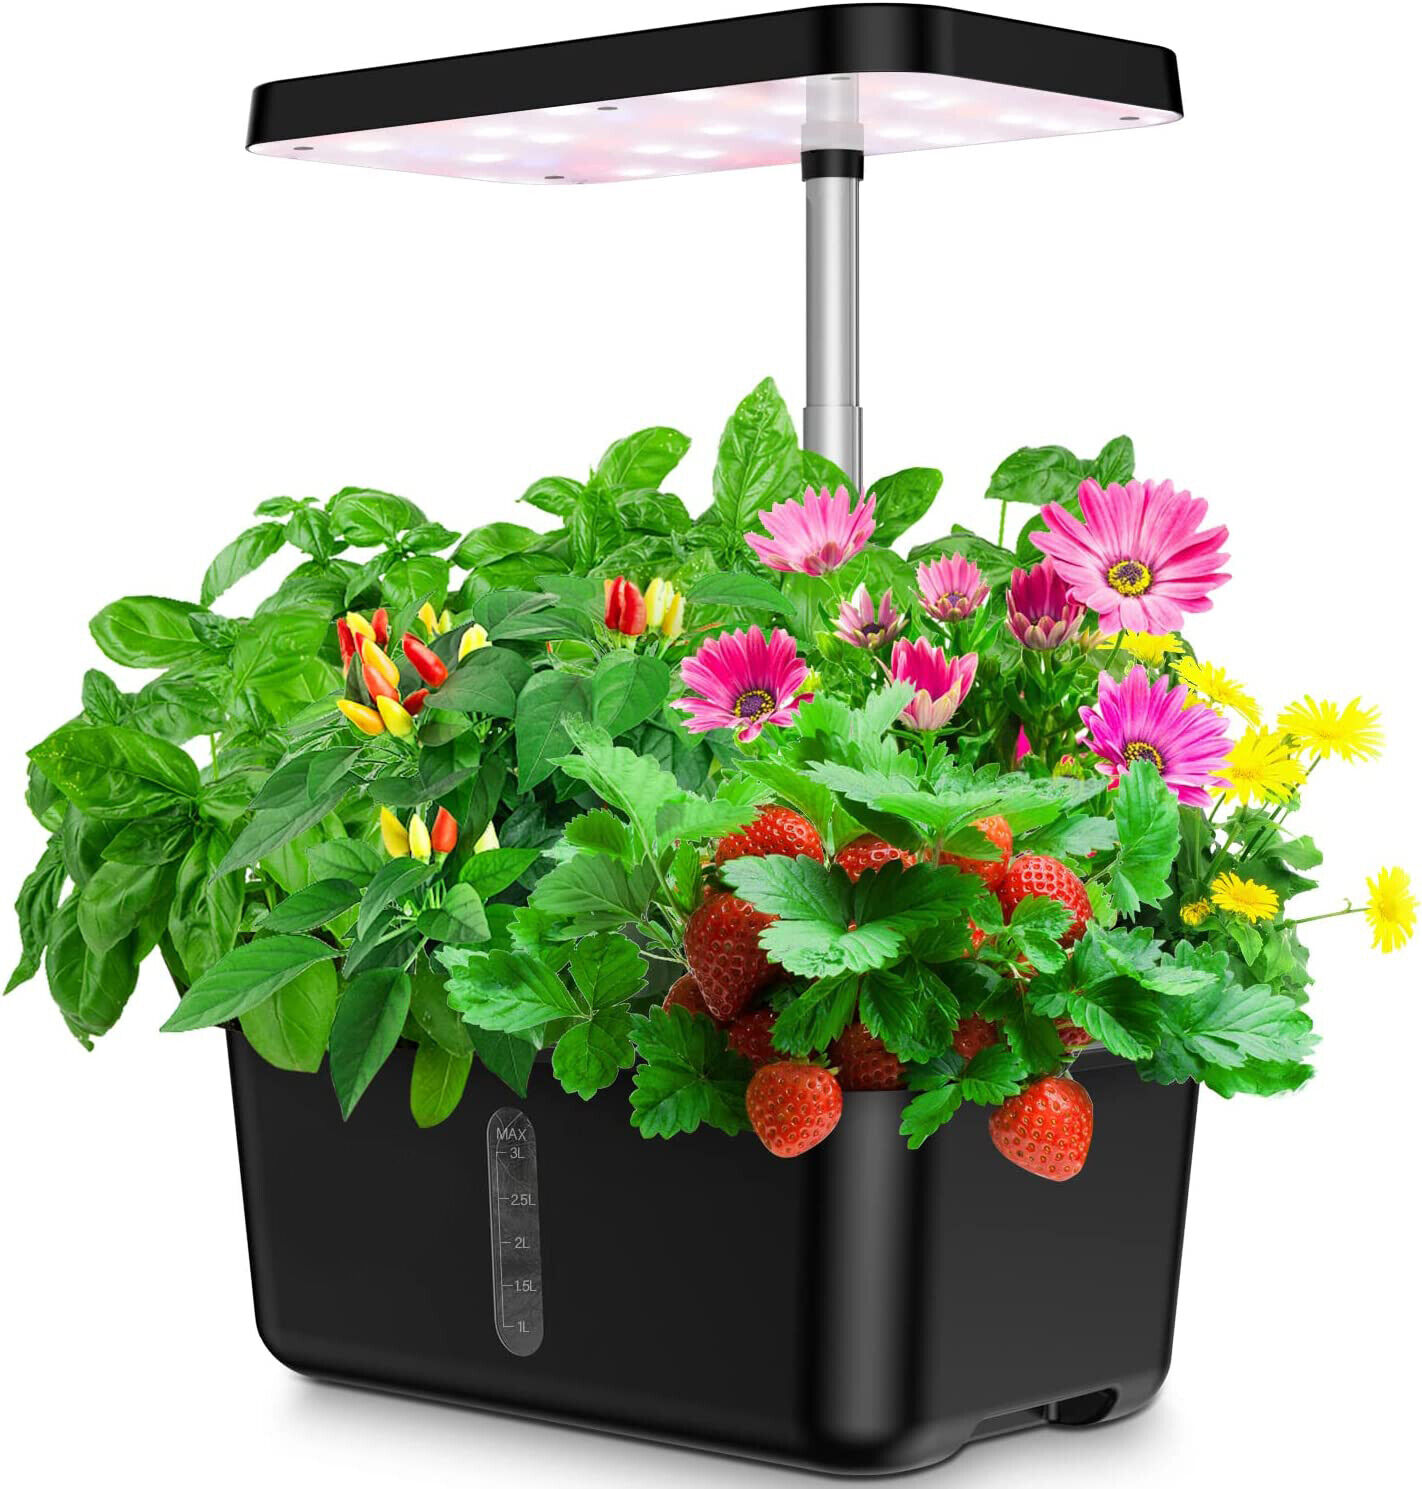 8 Pods Hydroponics Growing System Timer with LED Grow Light Indoor Herb Garden